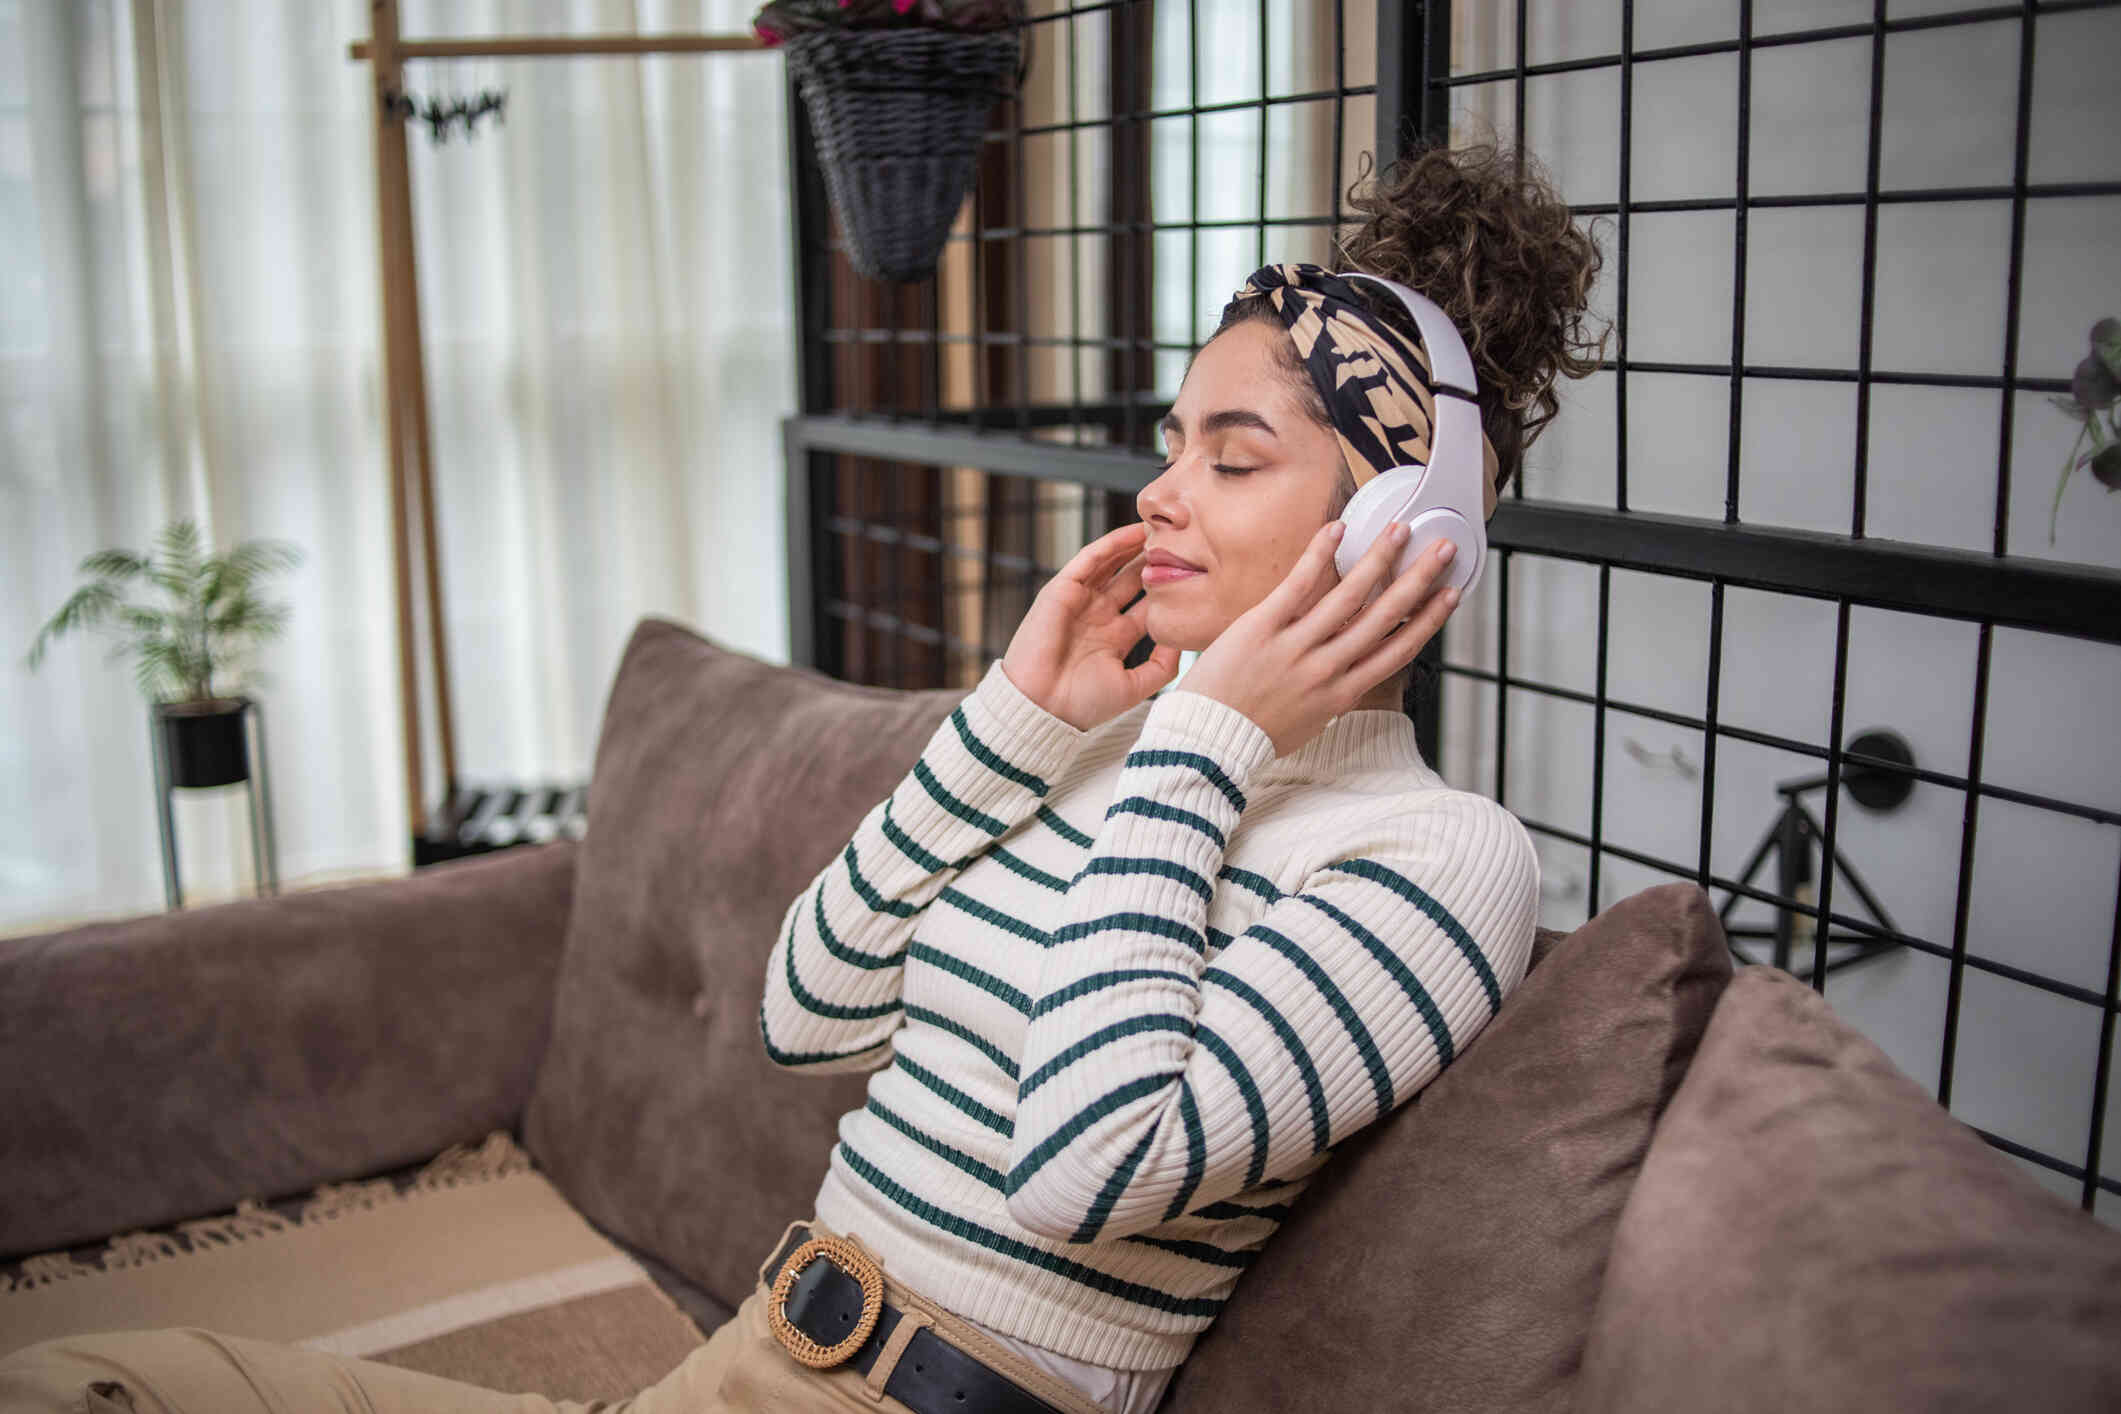 A woman in a striped shirt sits on her couch while closing her eyes and wearing white headphones.